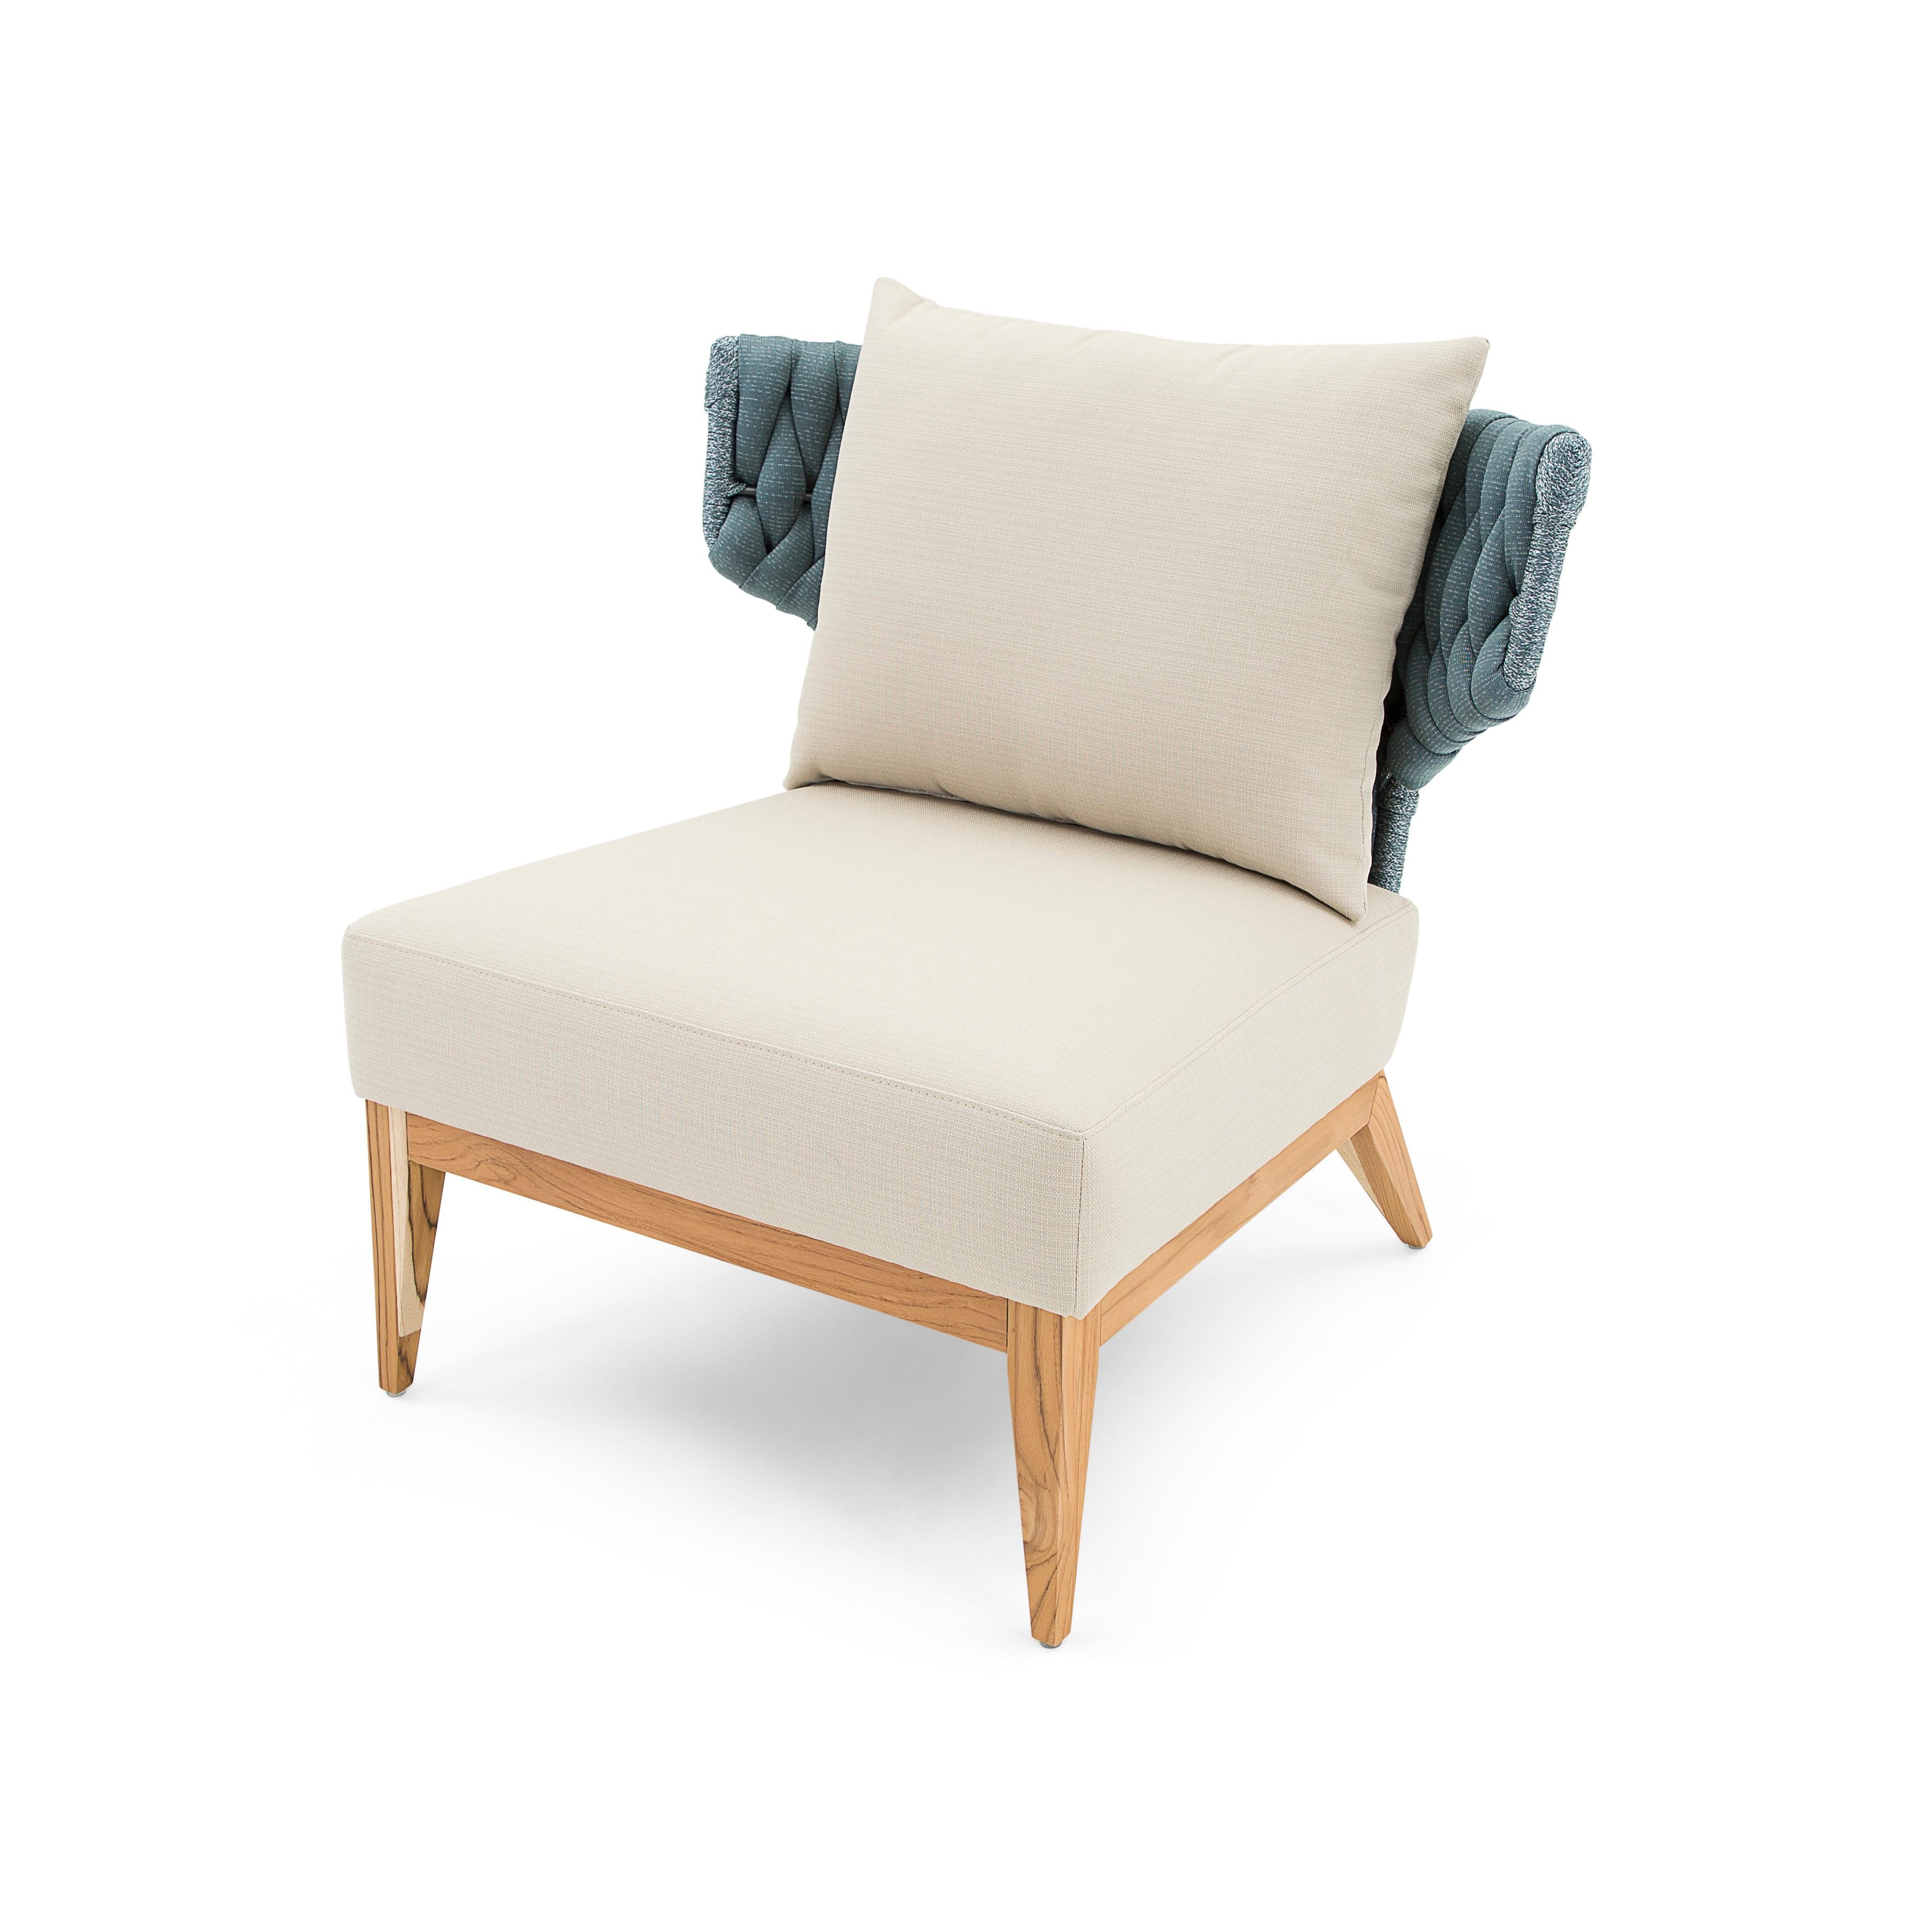 Beluga Outdoor Armchair in Beige and Blue fabric and Teak wood For Sale 1